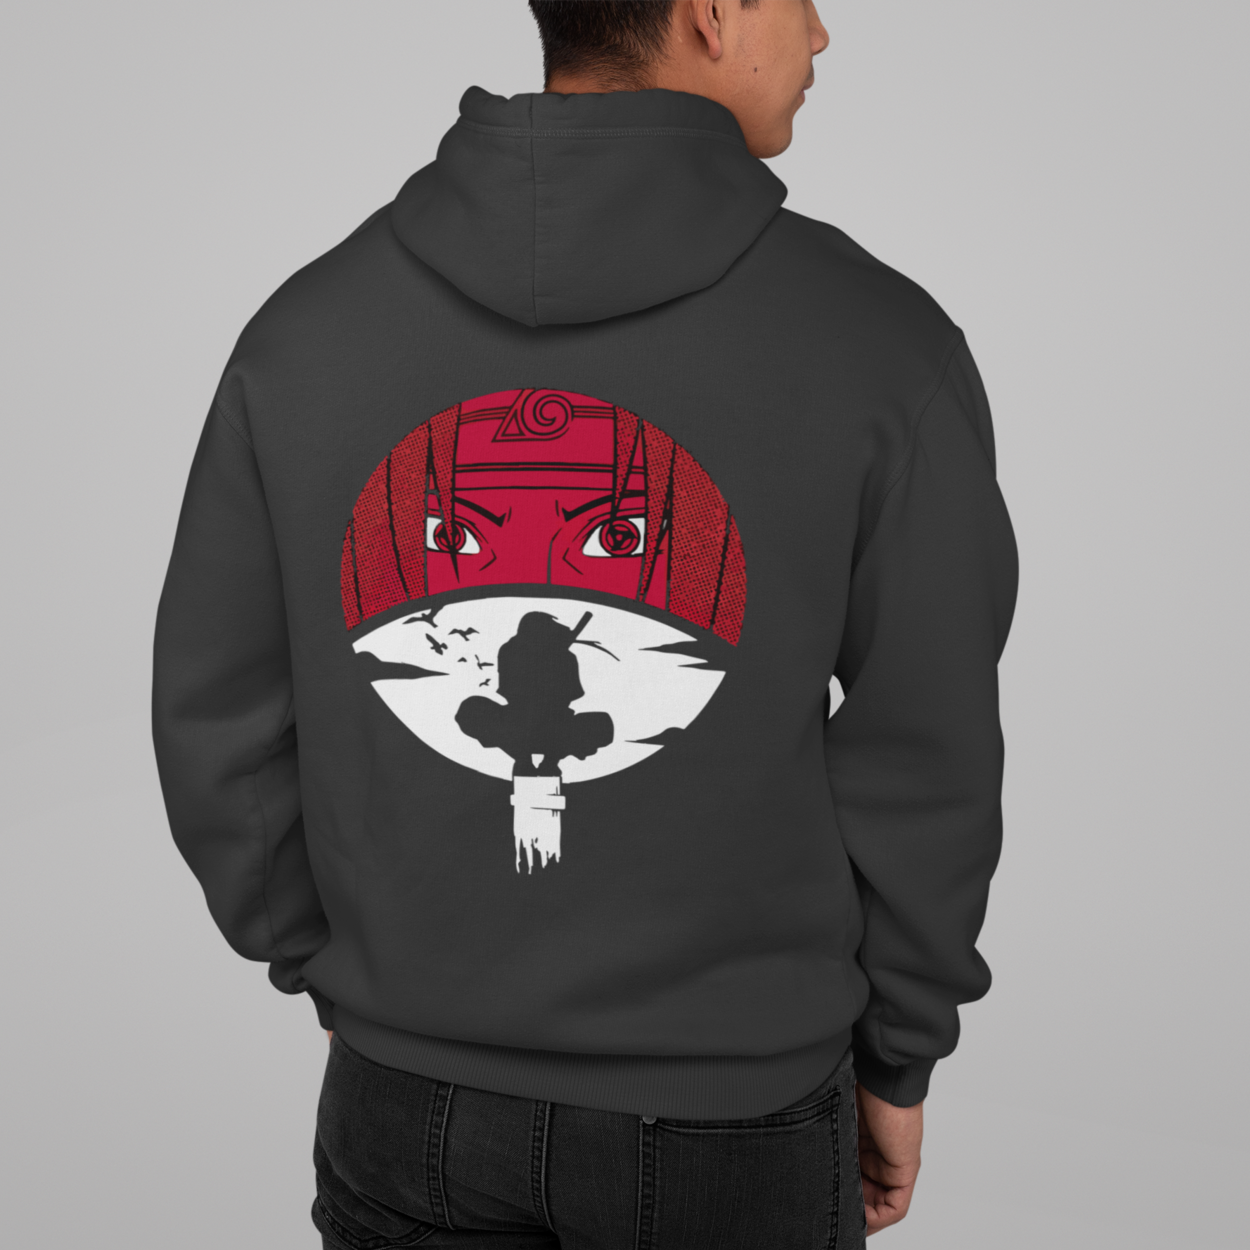 The best quality anime hoodies online in india at affordable in India   Clasf fashion